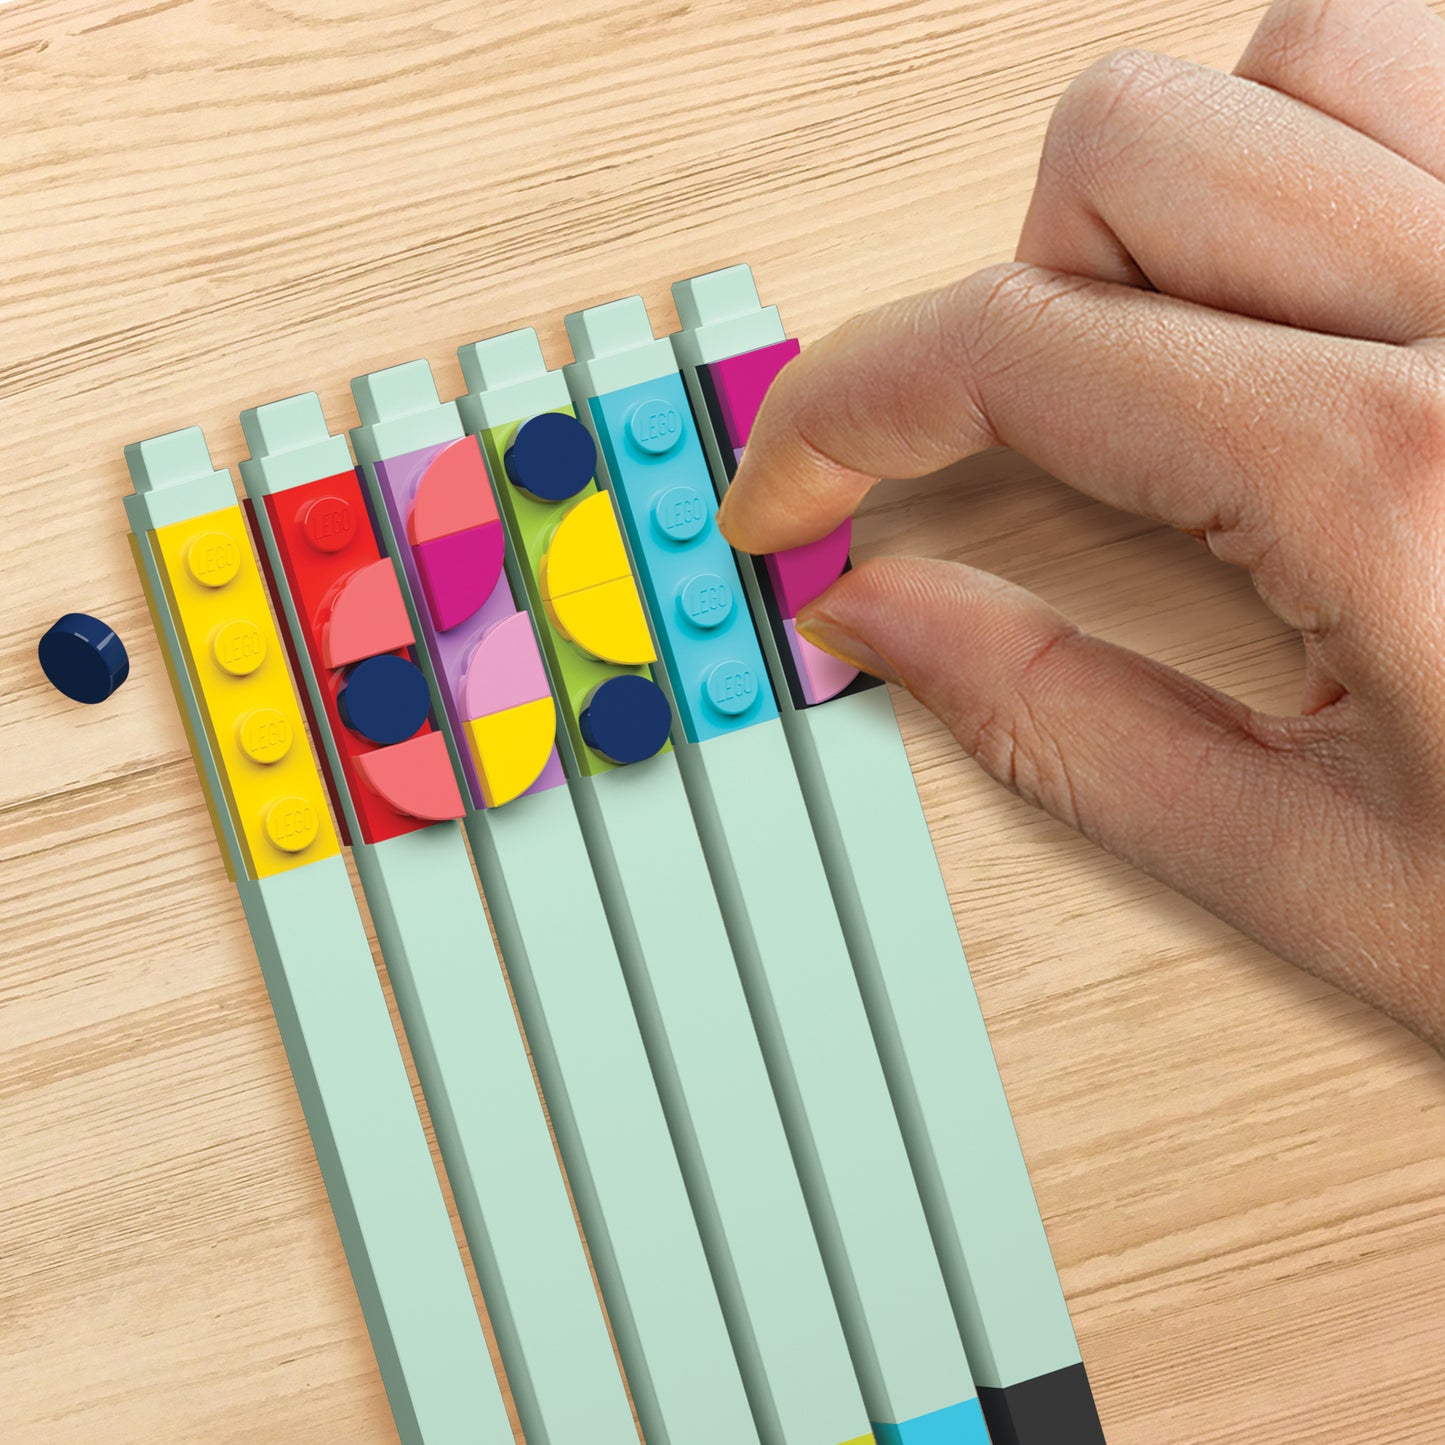 IQ LEGO® DOTS™ Writing Instrument 6 Pack Colored Gel Pens with LEGO Tiles (52798)